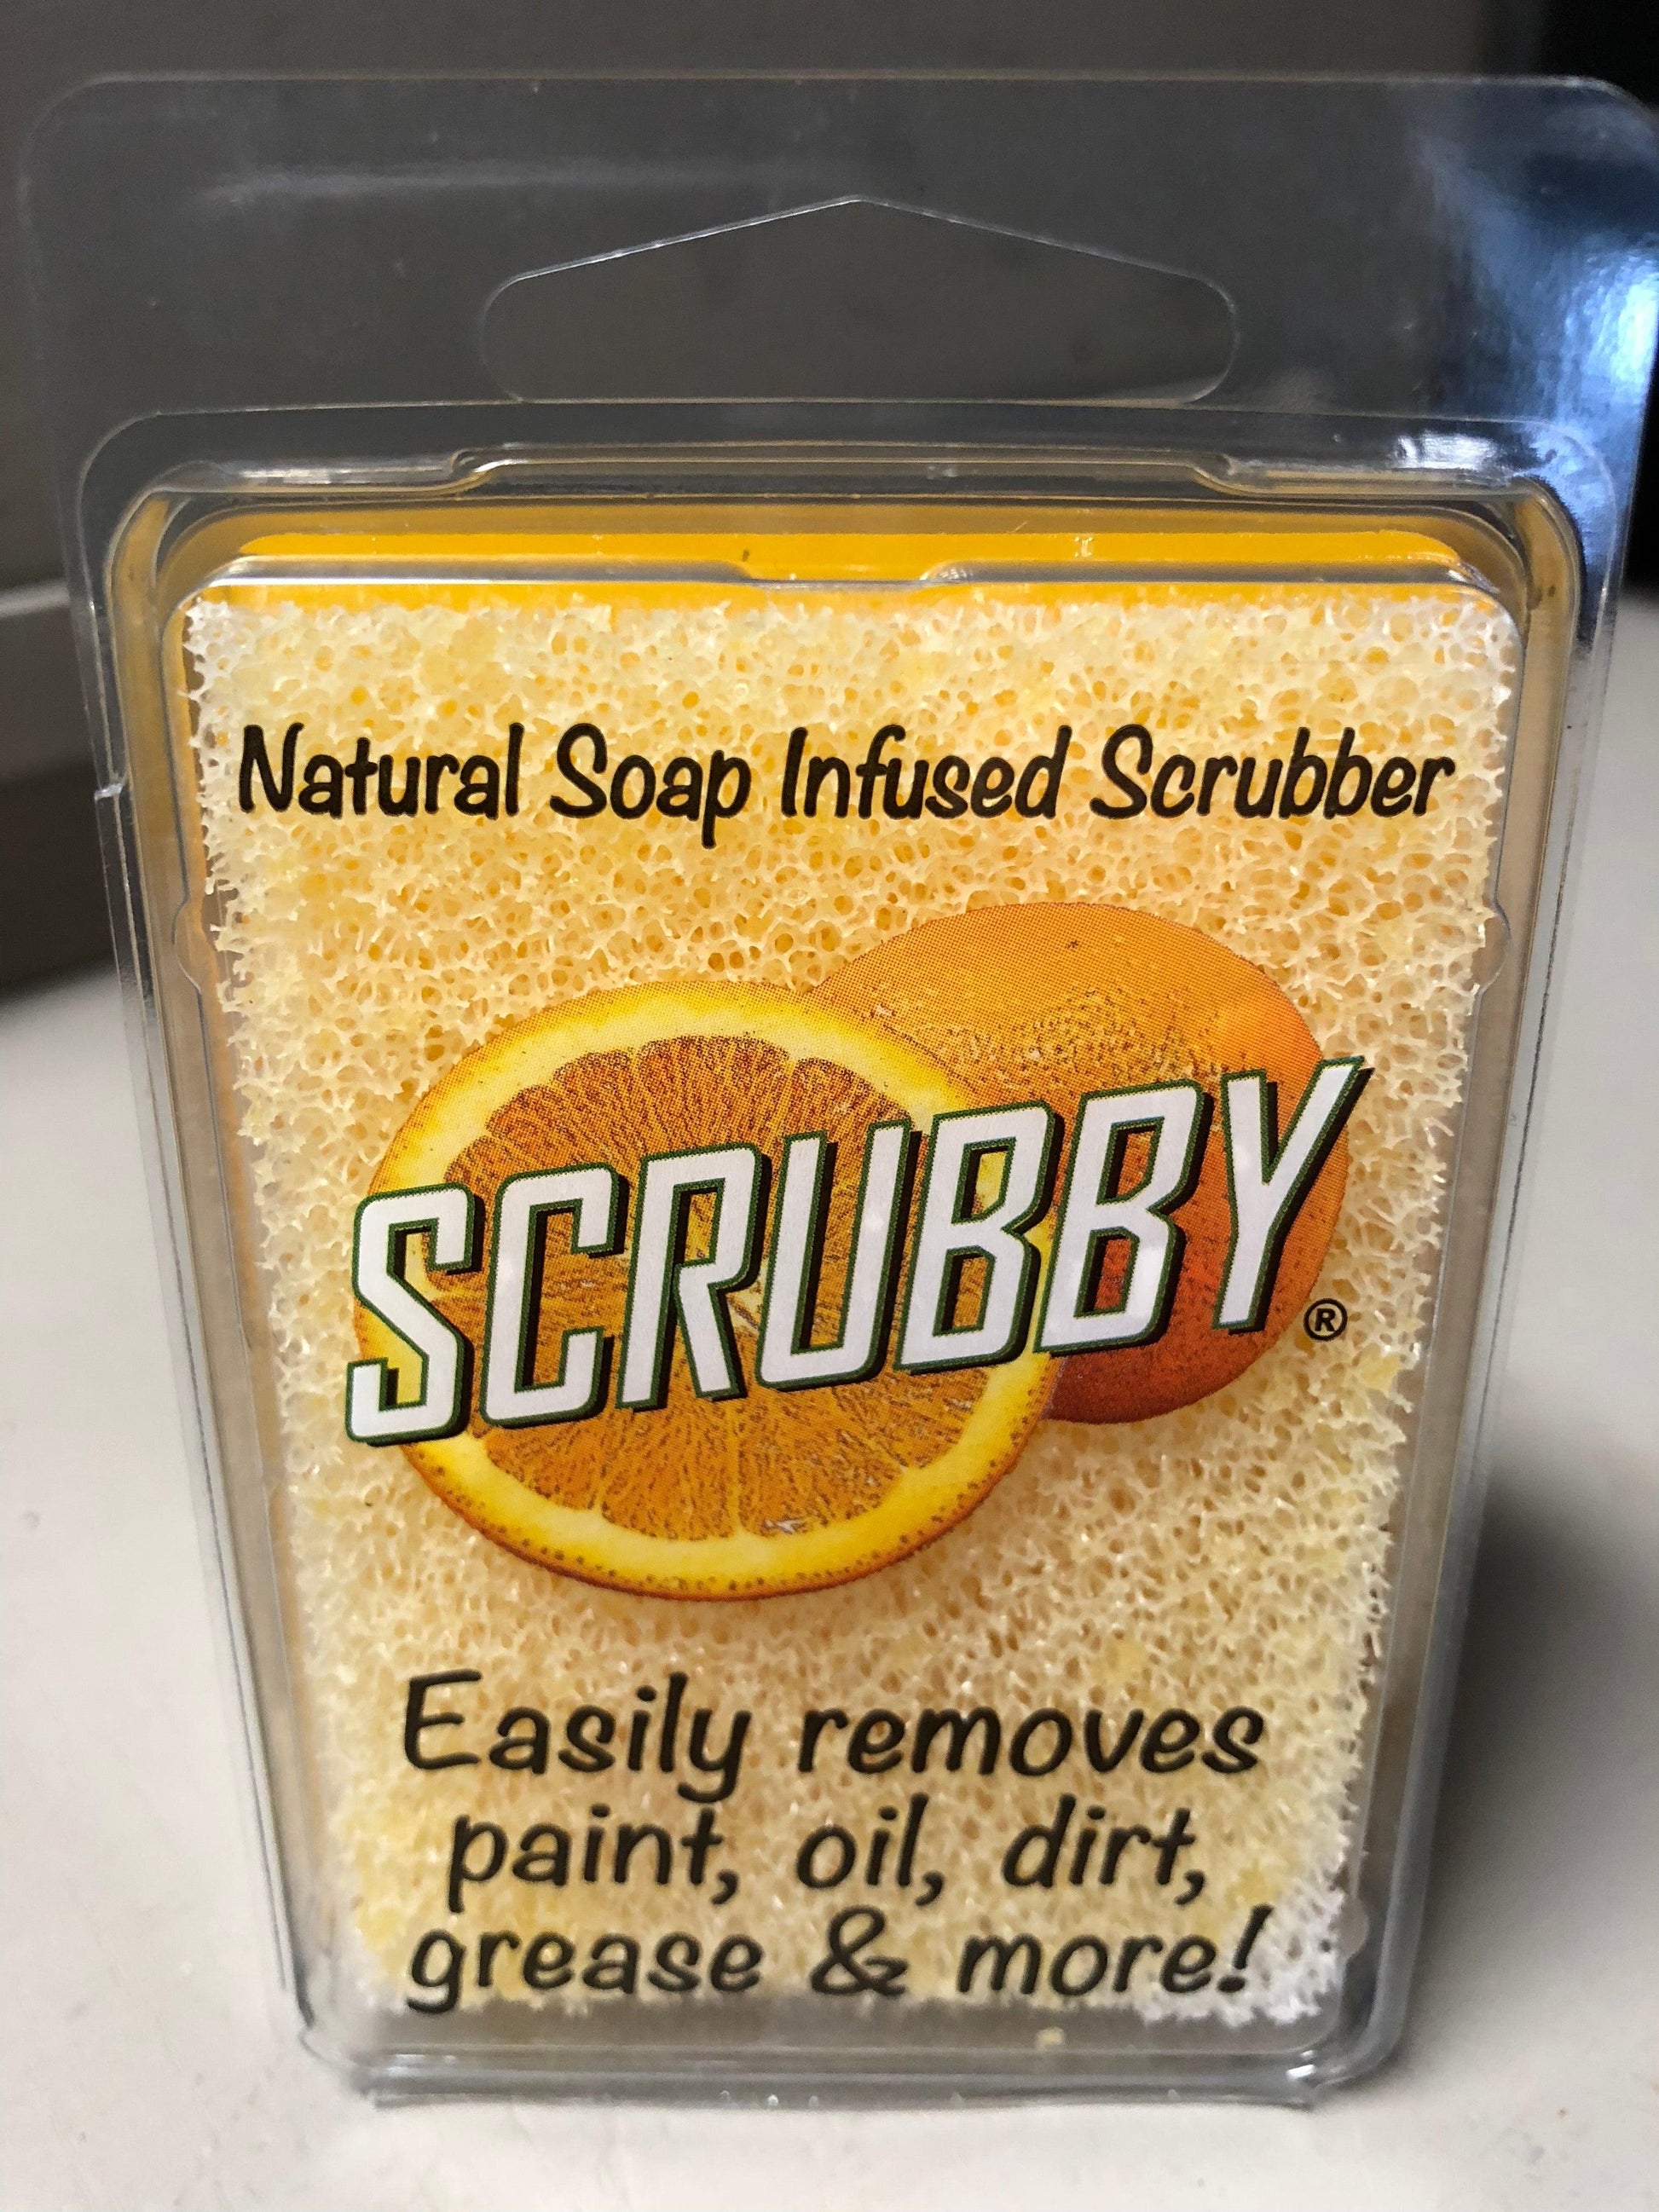 Scrubby Soap - The 3 Painted Pugs